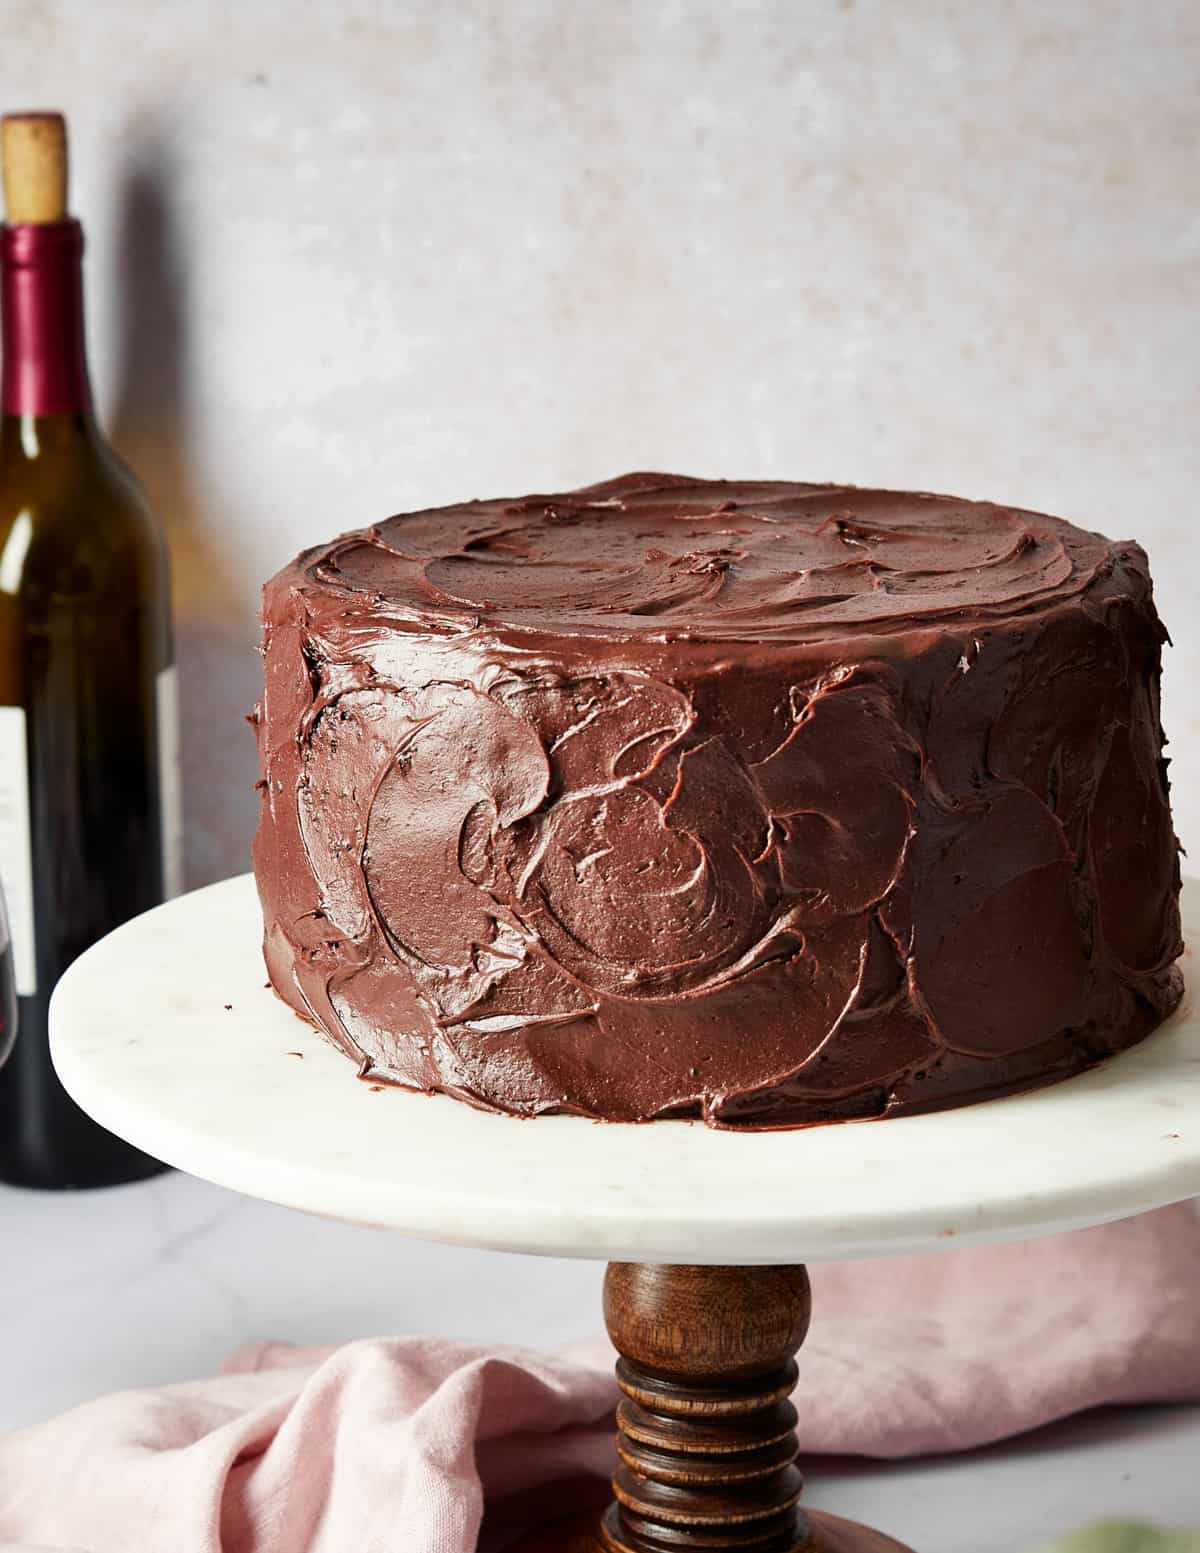 red wine chocolate with chocolate cream cheese frosting on a cake stand.